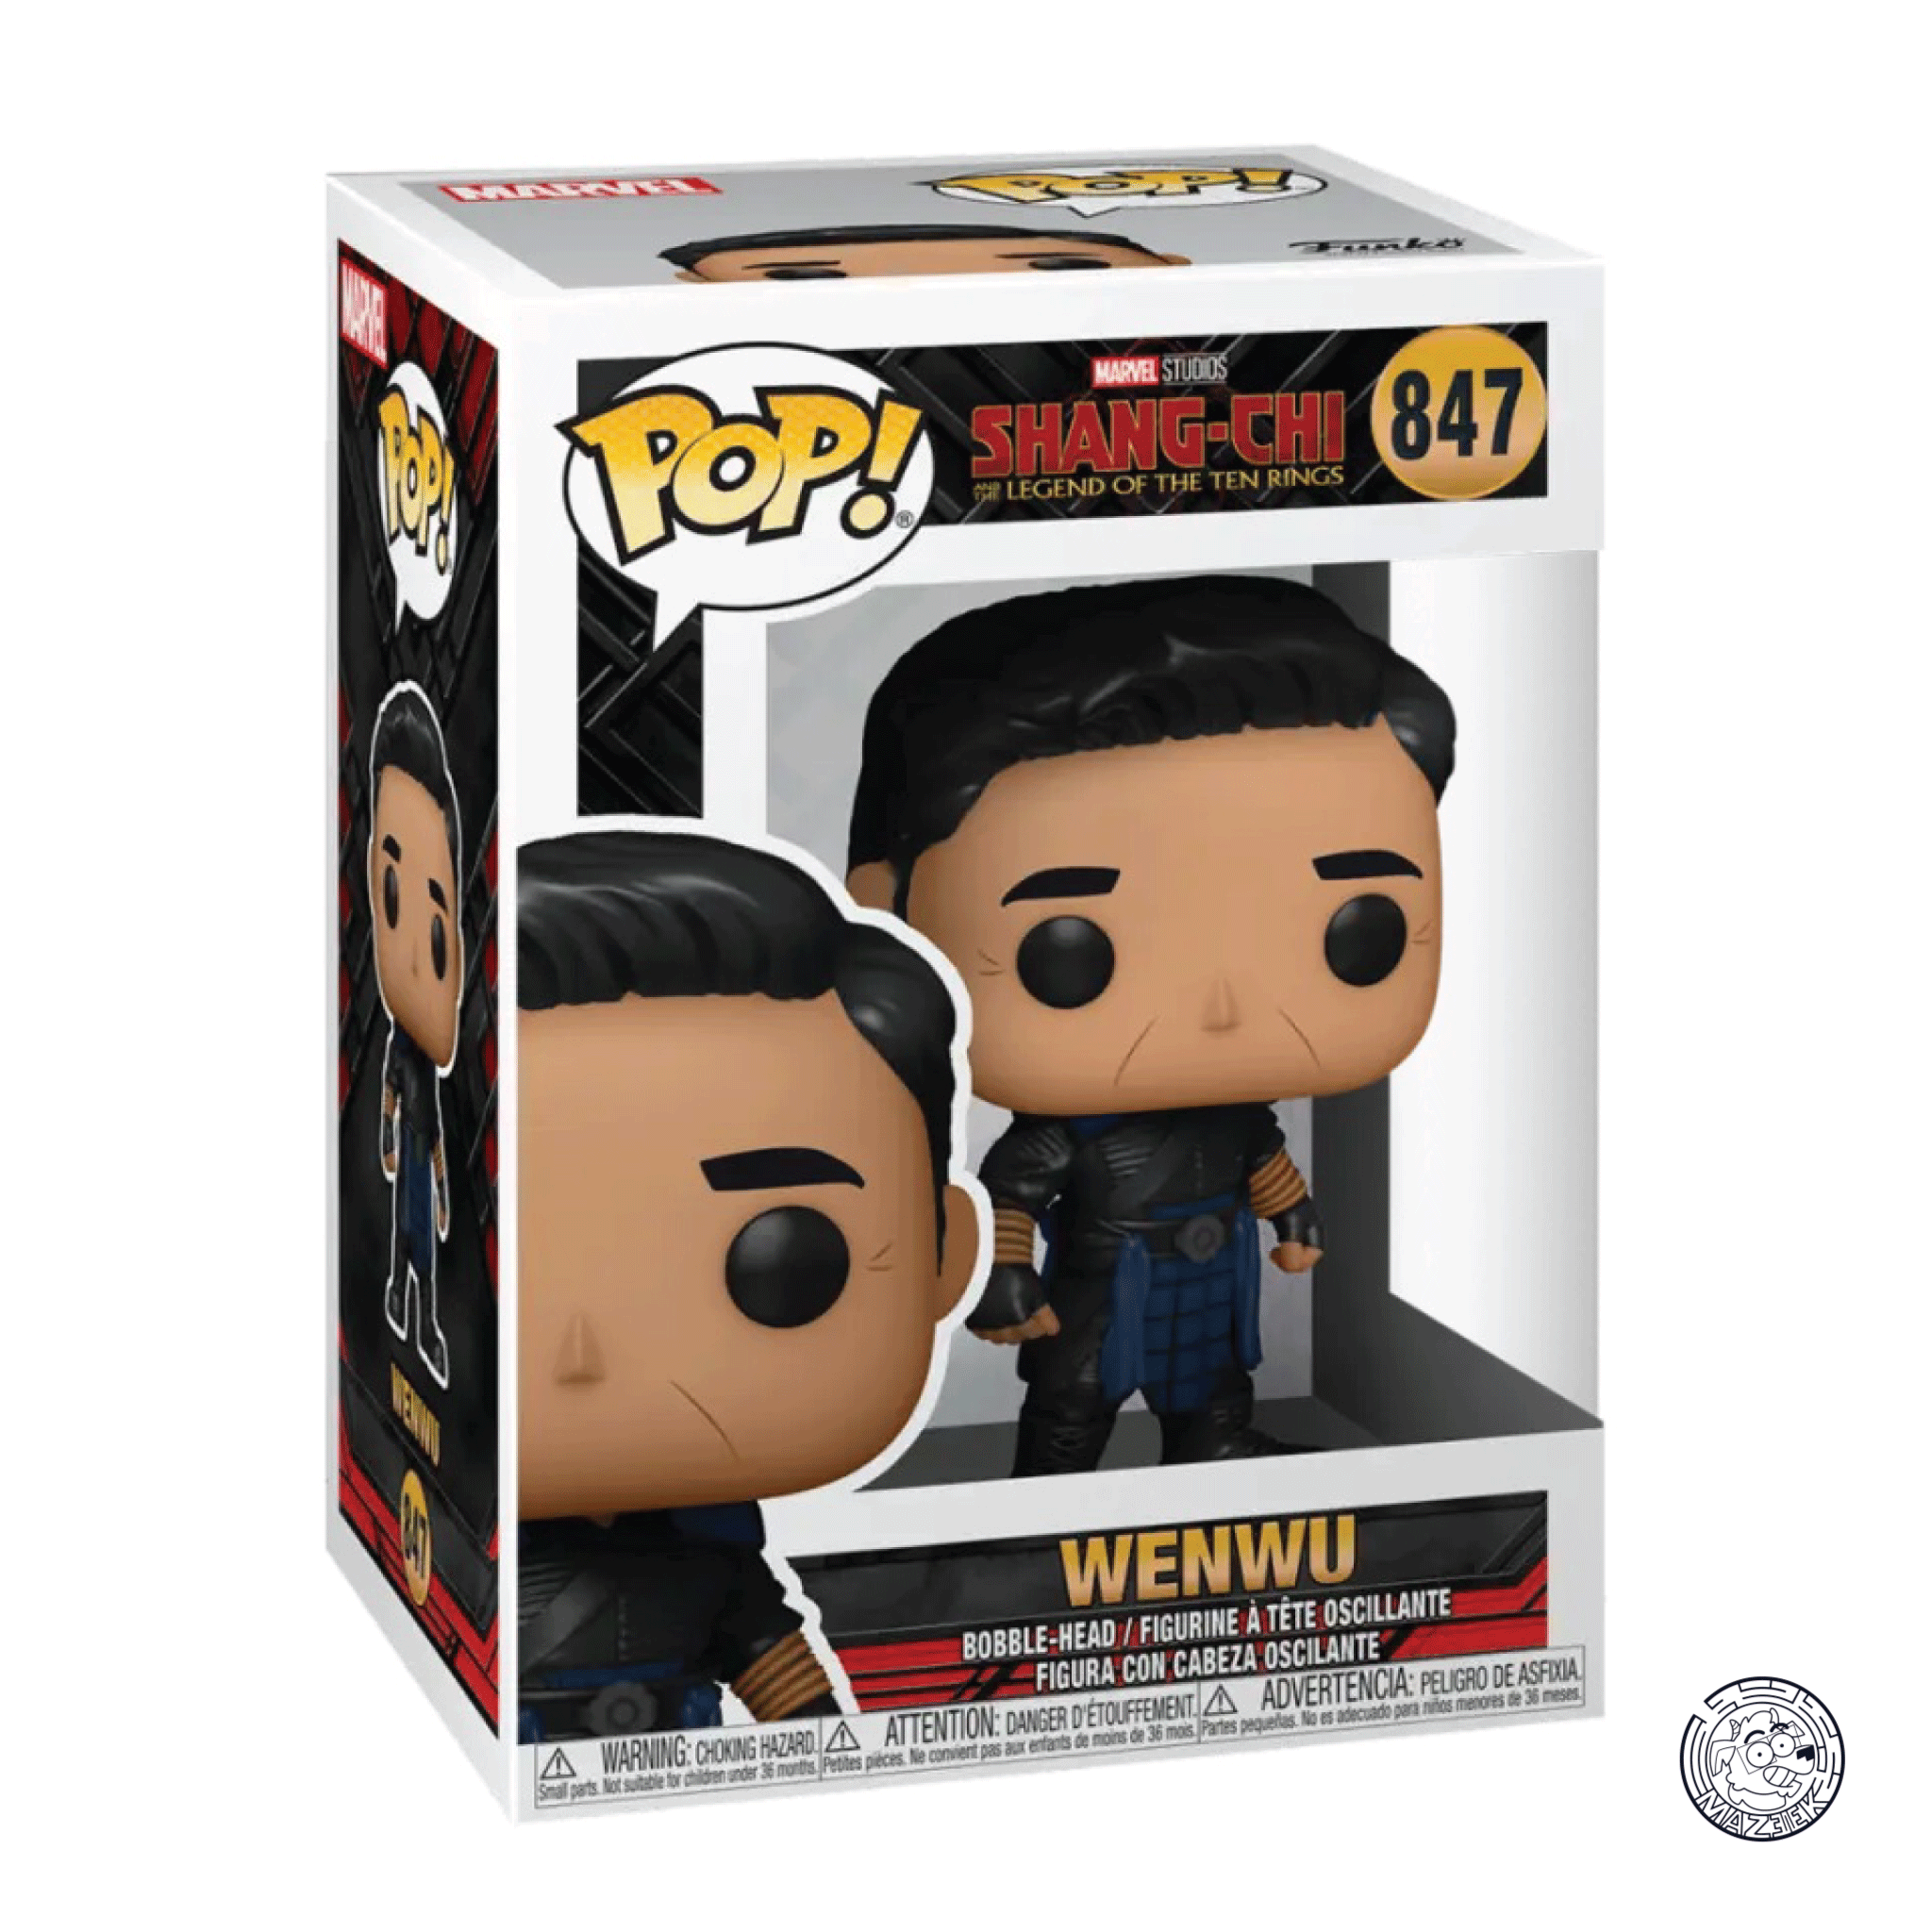 Funko POP! Shang-Chi and the Legend of the Ten Rings: Wenwu 847